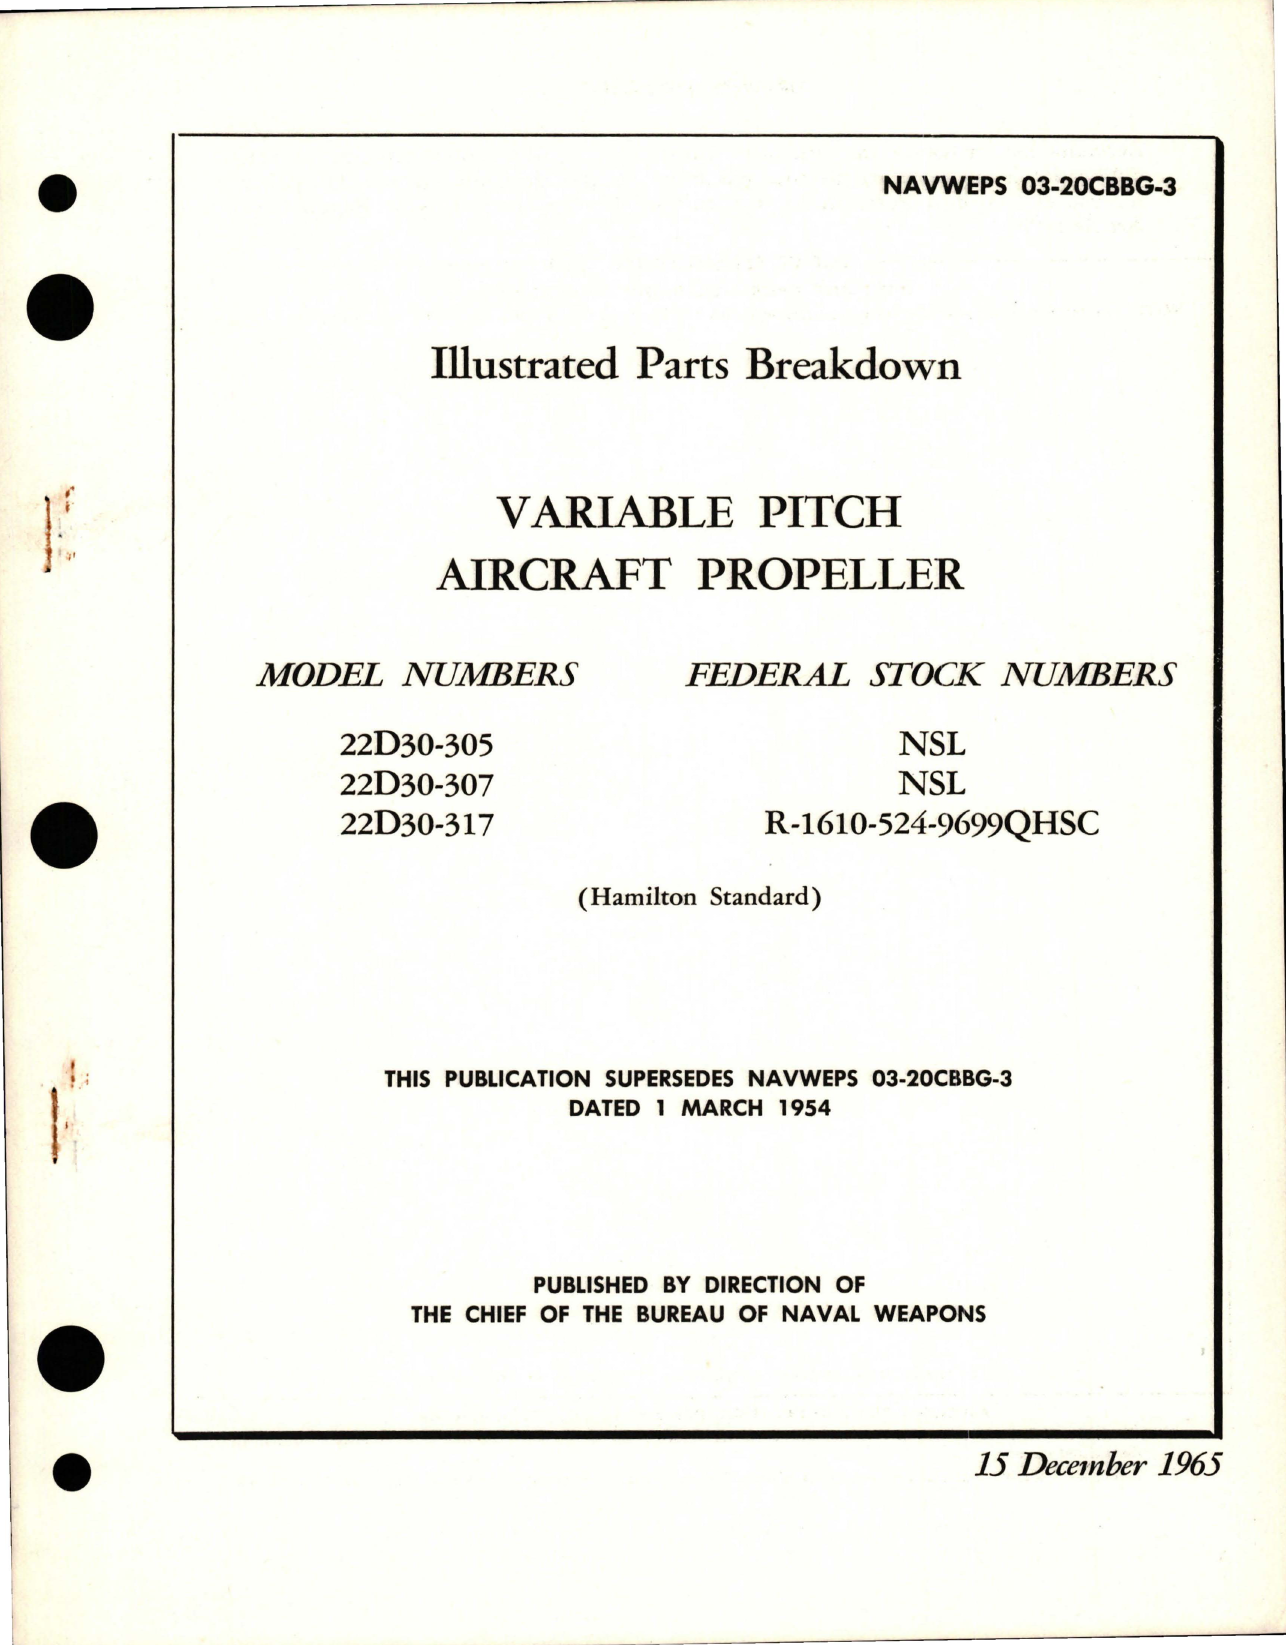 Sample page 1 from AirCorps Library document: Illustrated Parts Breakdown for Variable Pitch Propeller - Models 22D30-305, 22D30-307, and 22D30-317